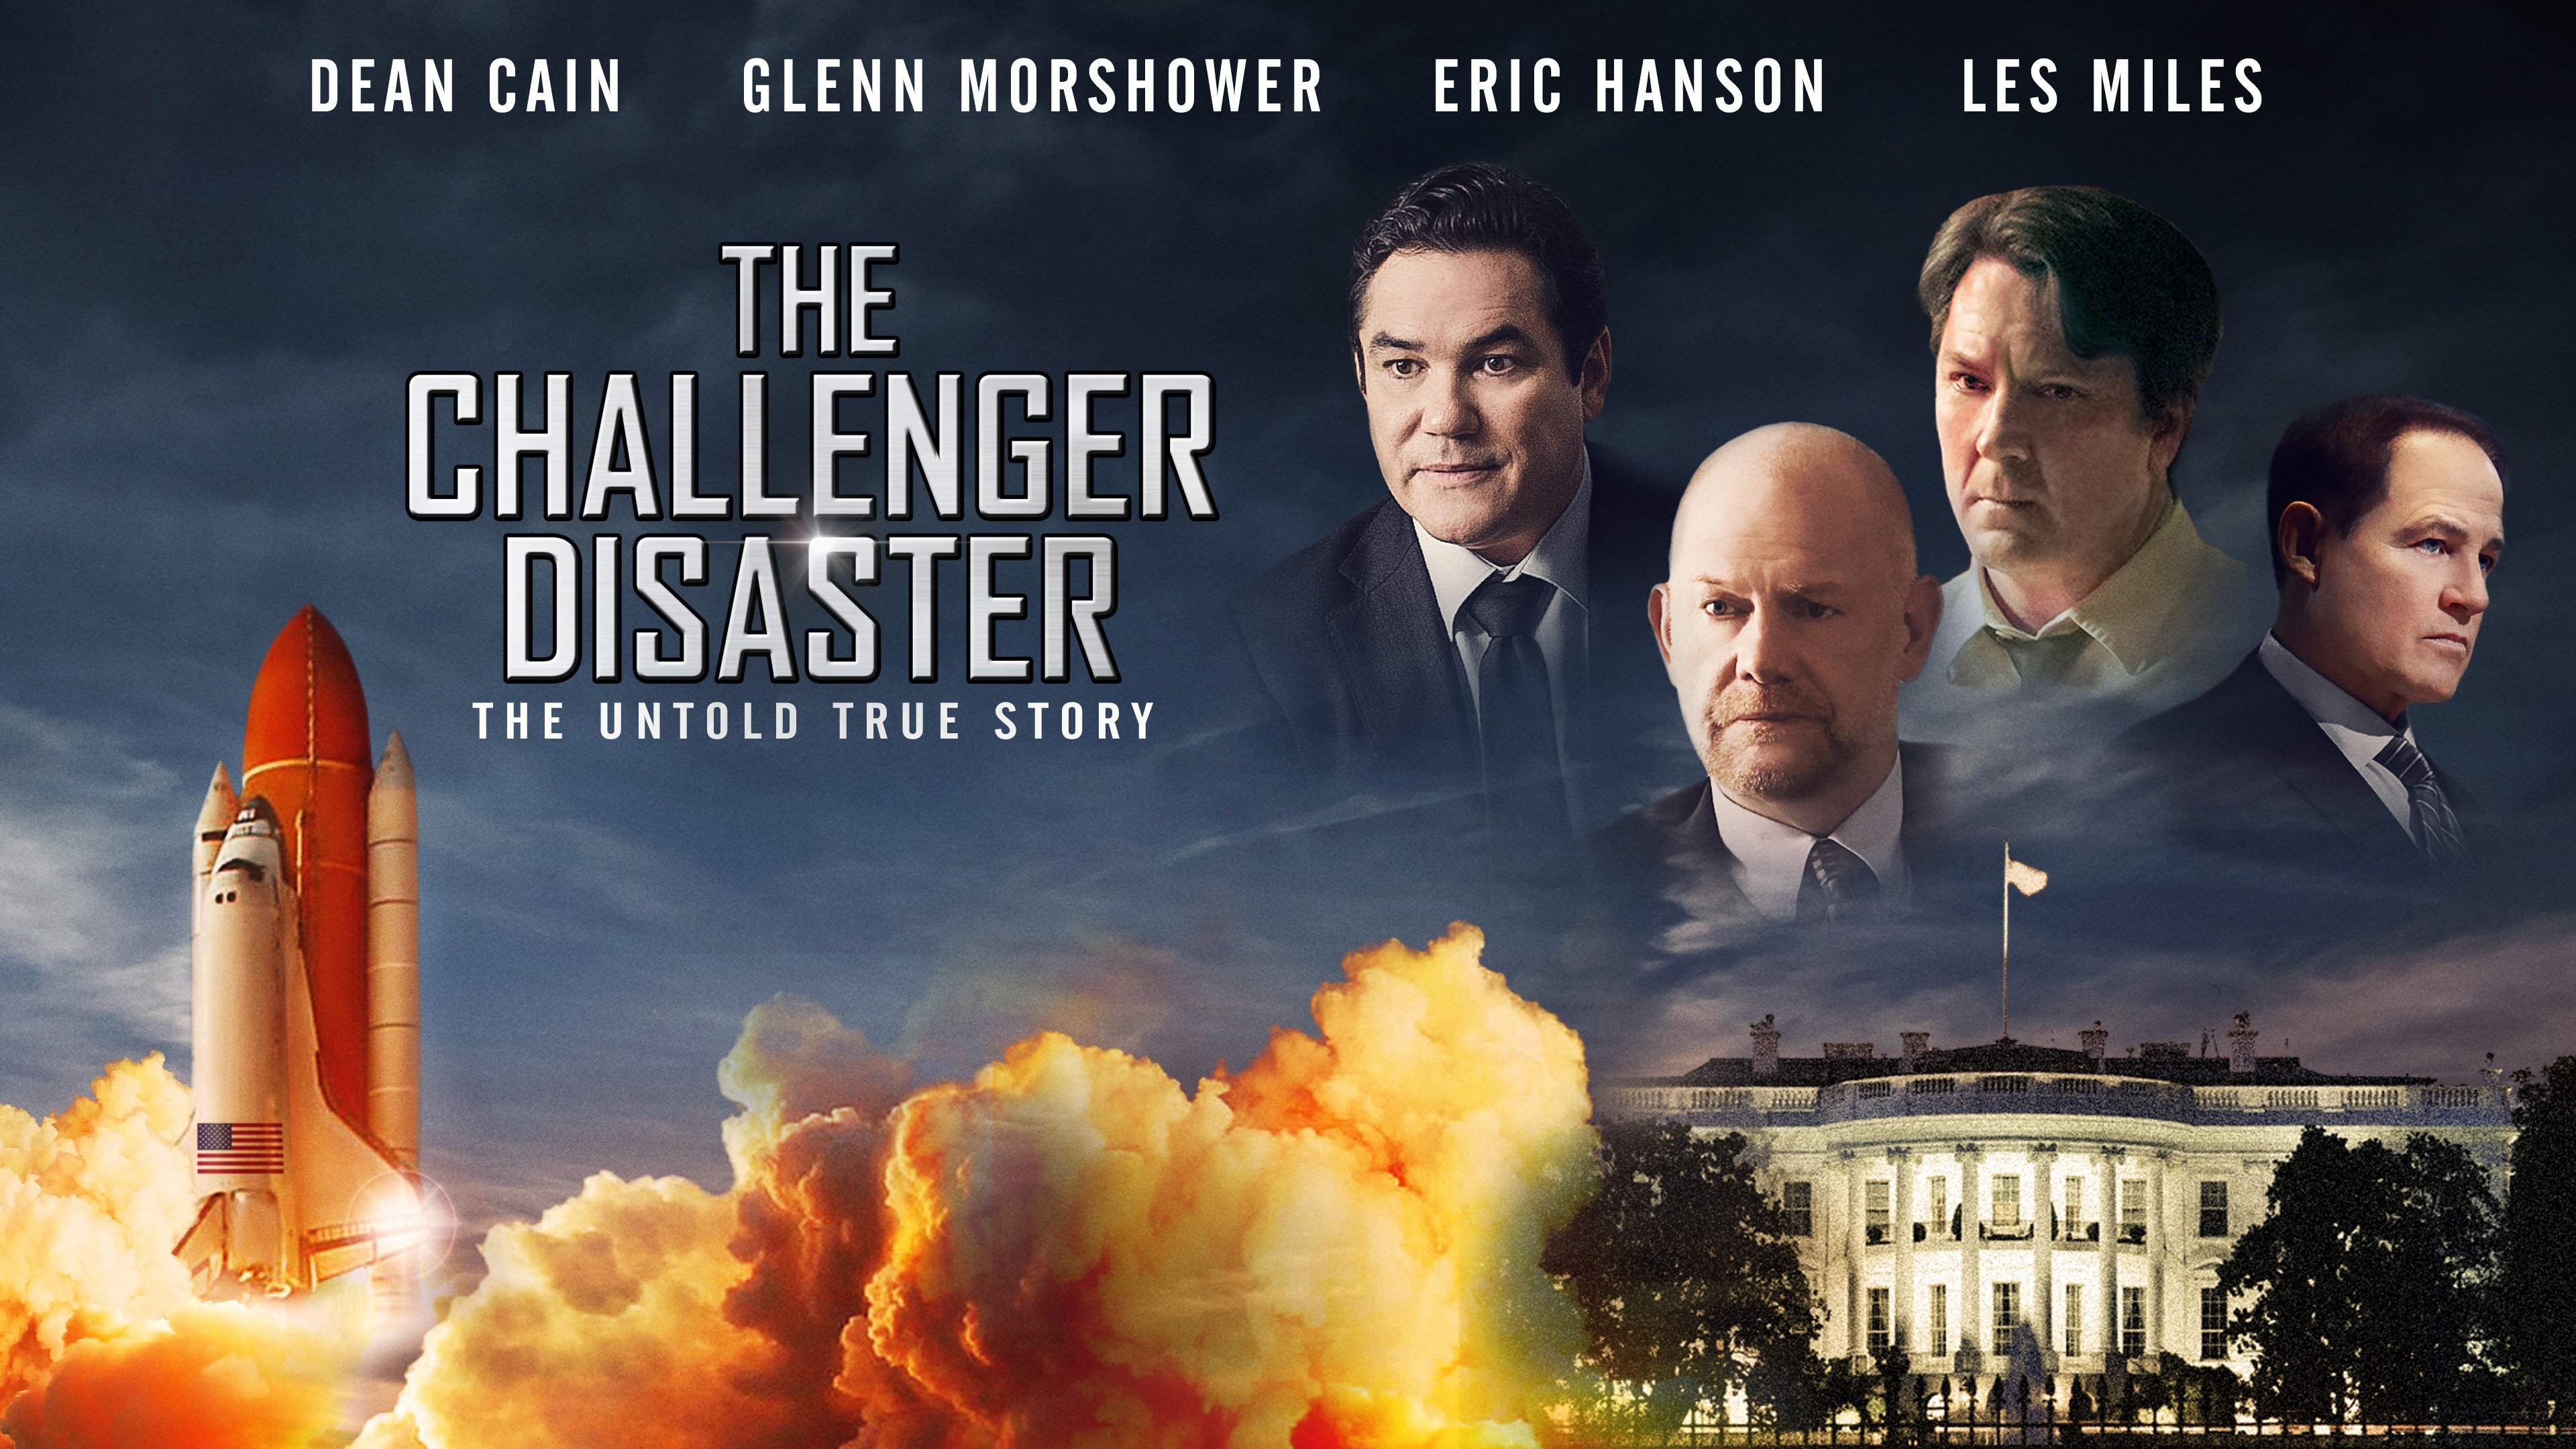 The Challenger Disaster: Trailer 1 - Trailers & Videos - Rotten Tomatoes